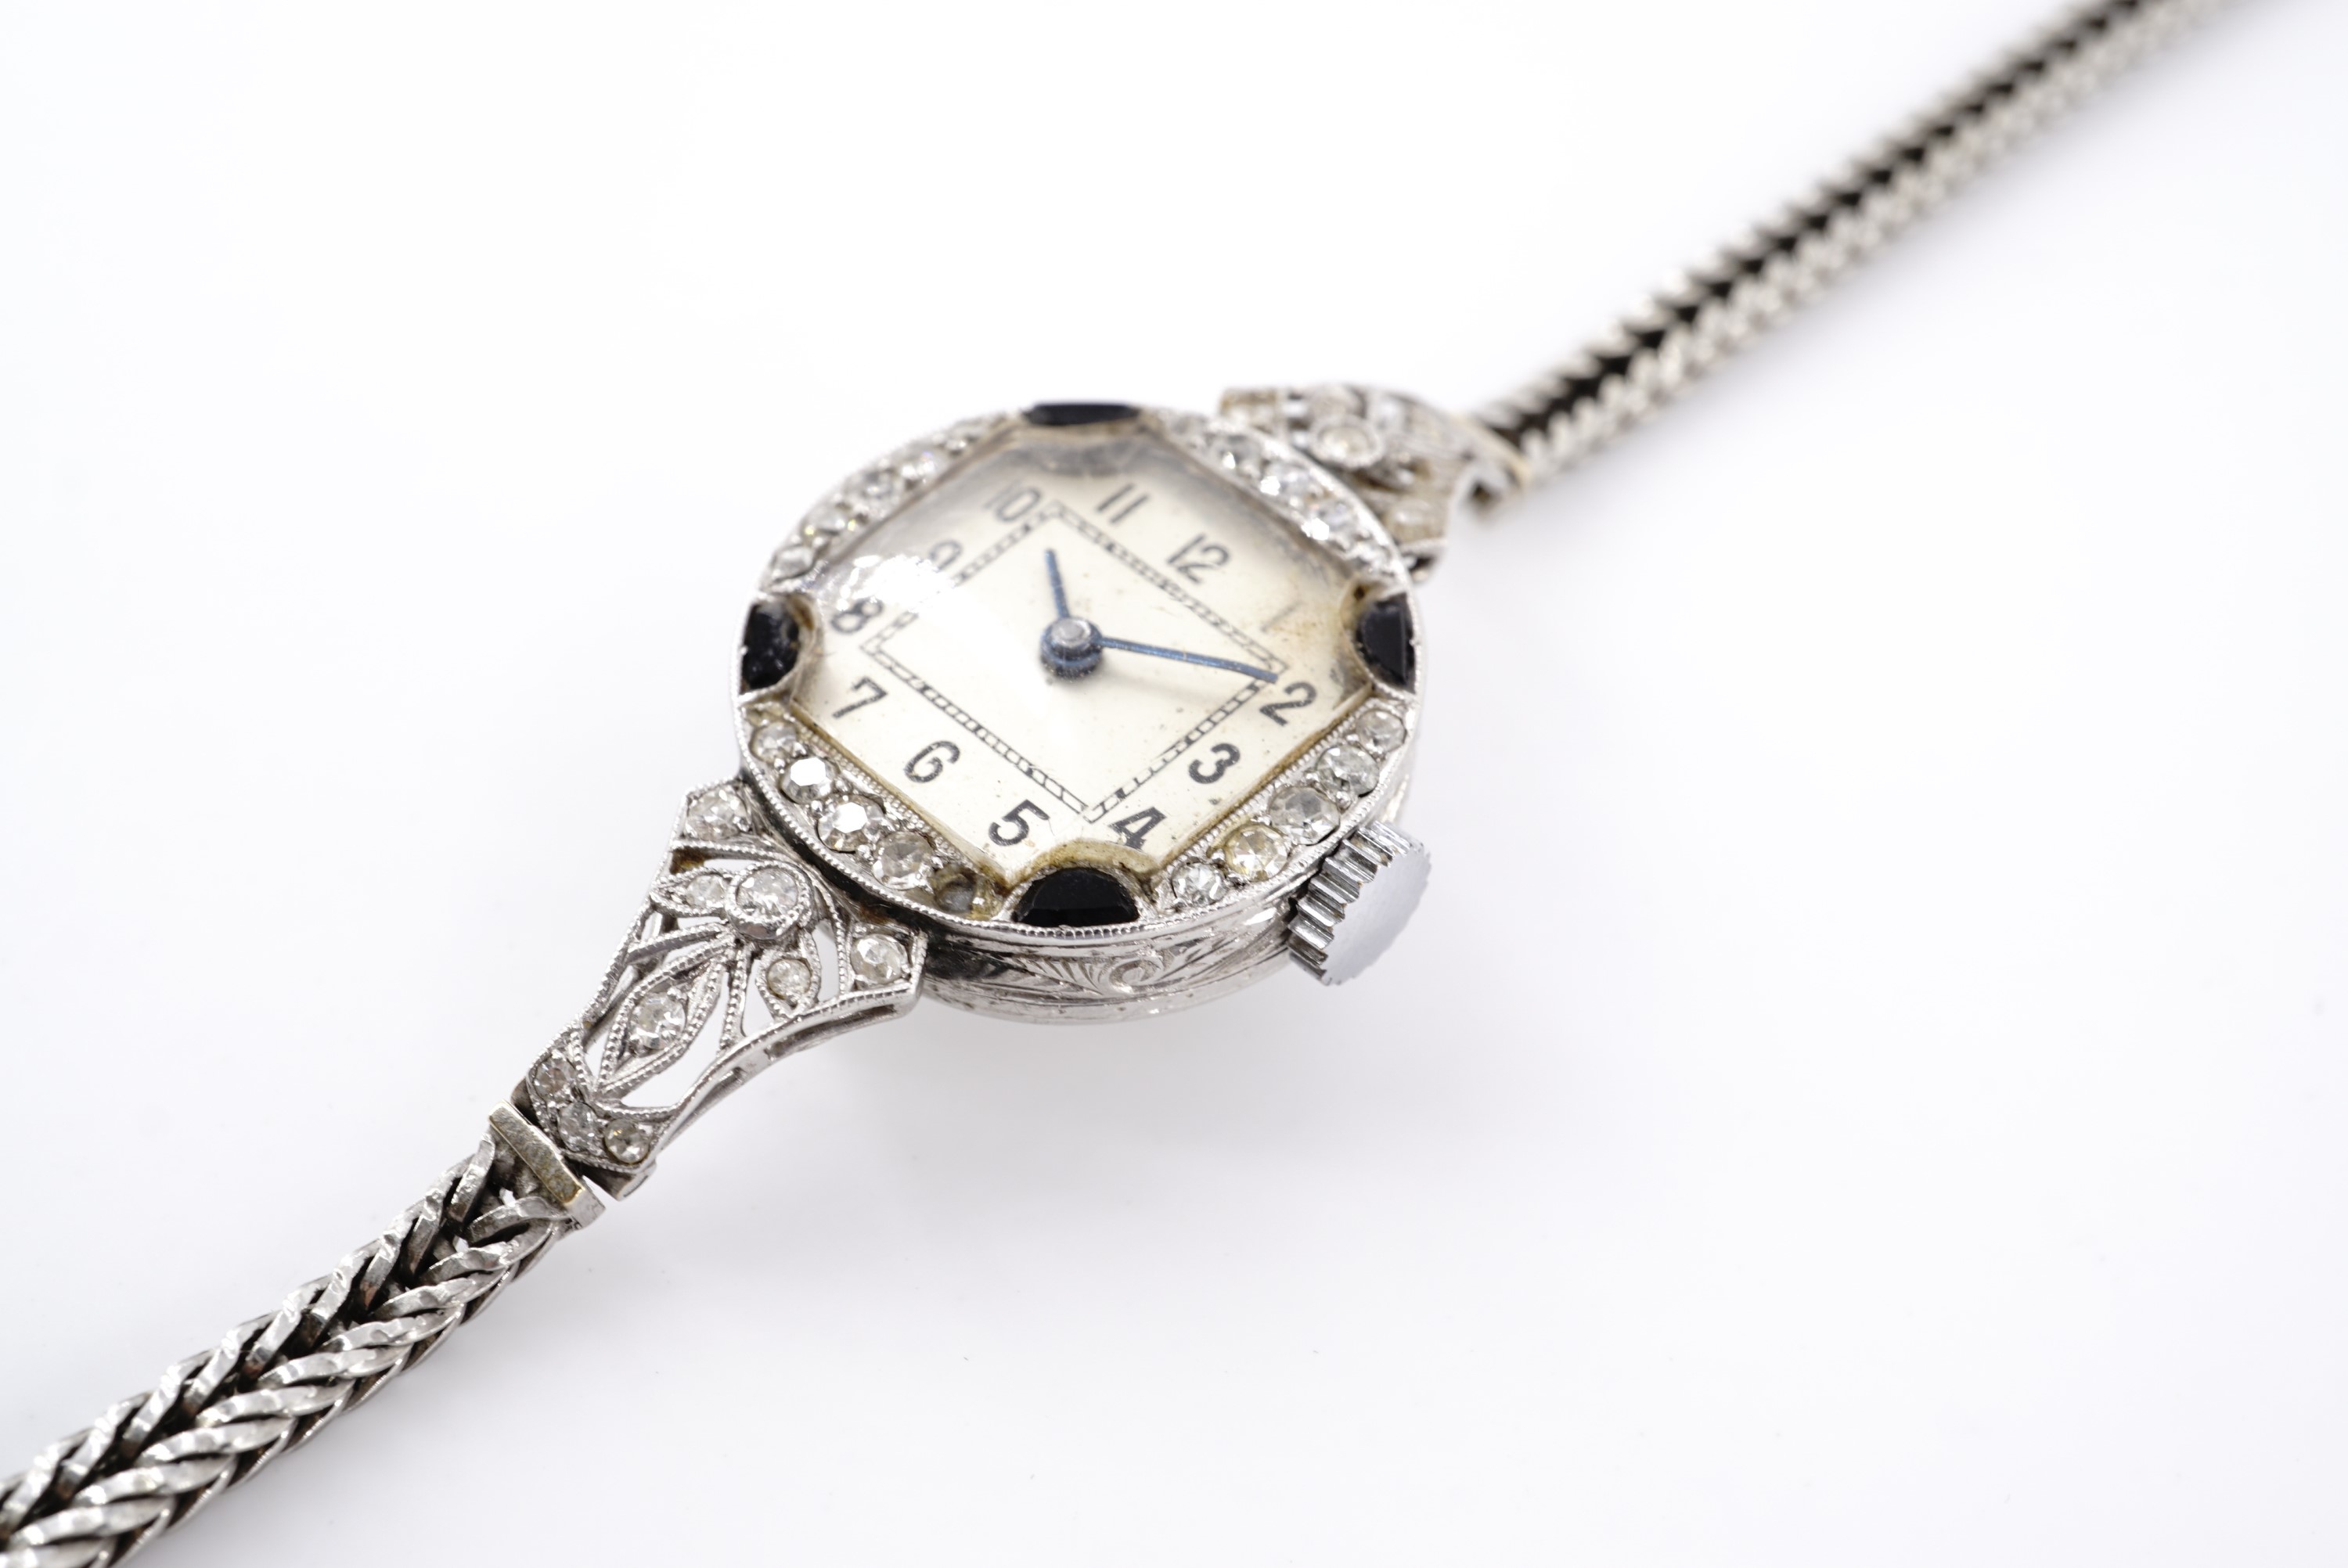 A 1920s Art Deco platinum, diamond and blue stone cocktail watch, having a Swiss 17 jewel movement - Image 2 of 3